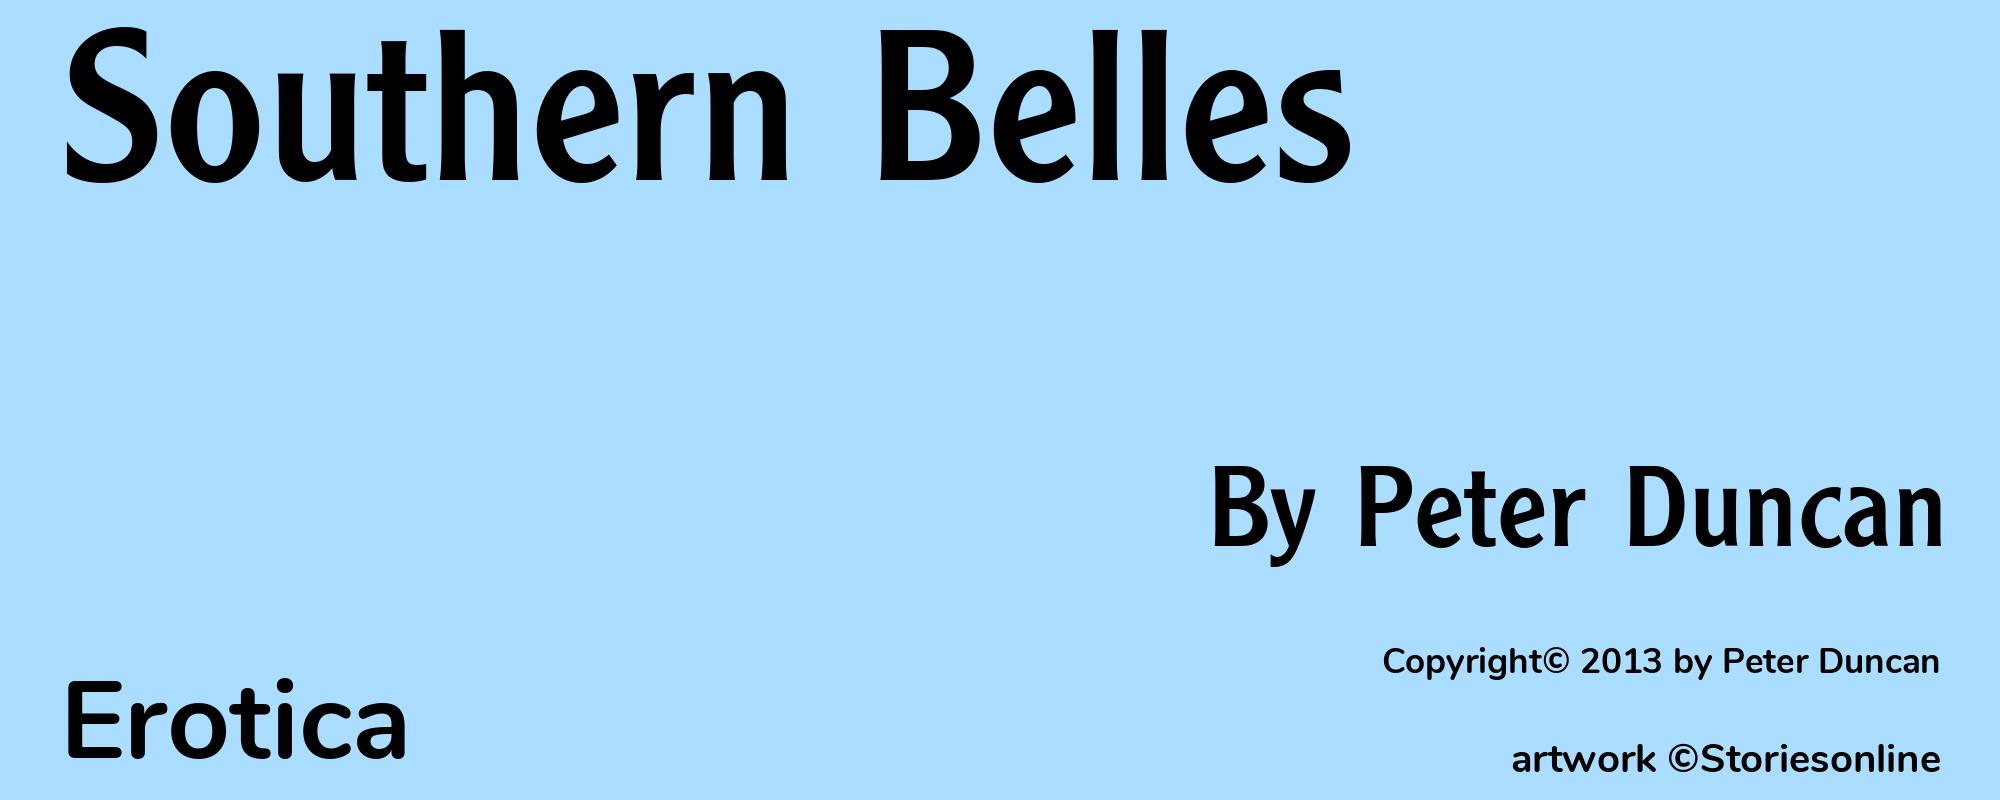 Southern Belles - Cover